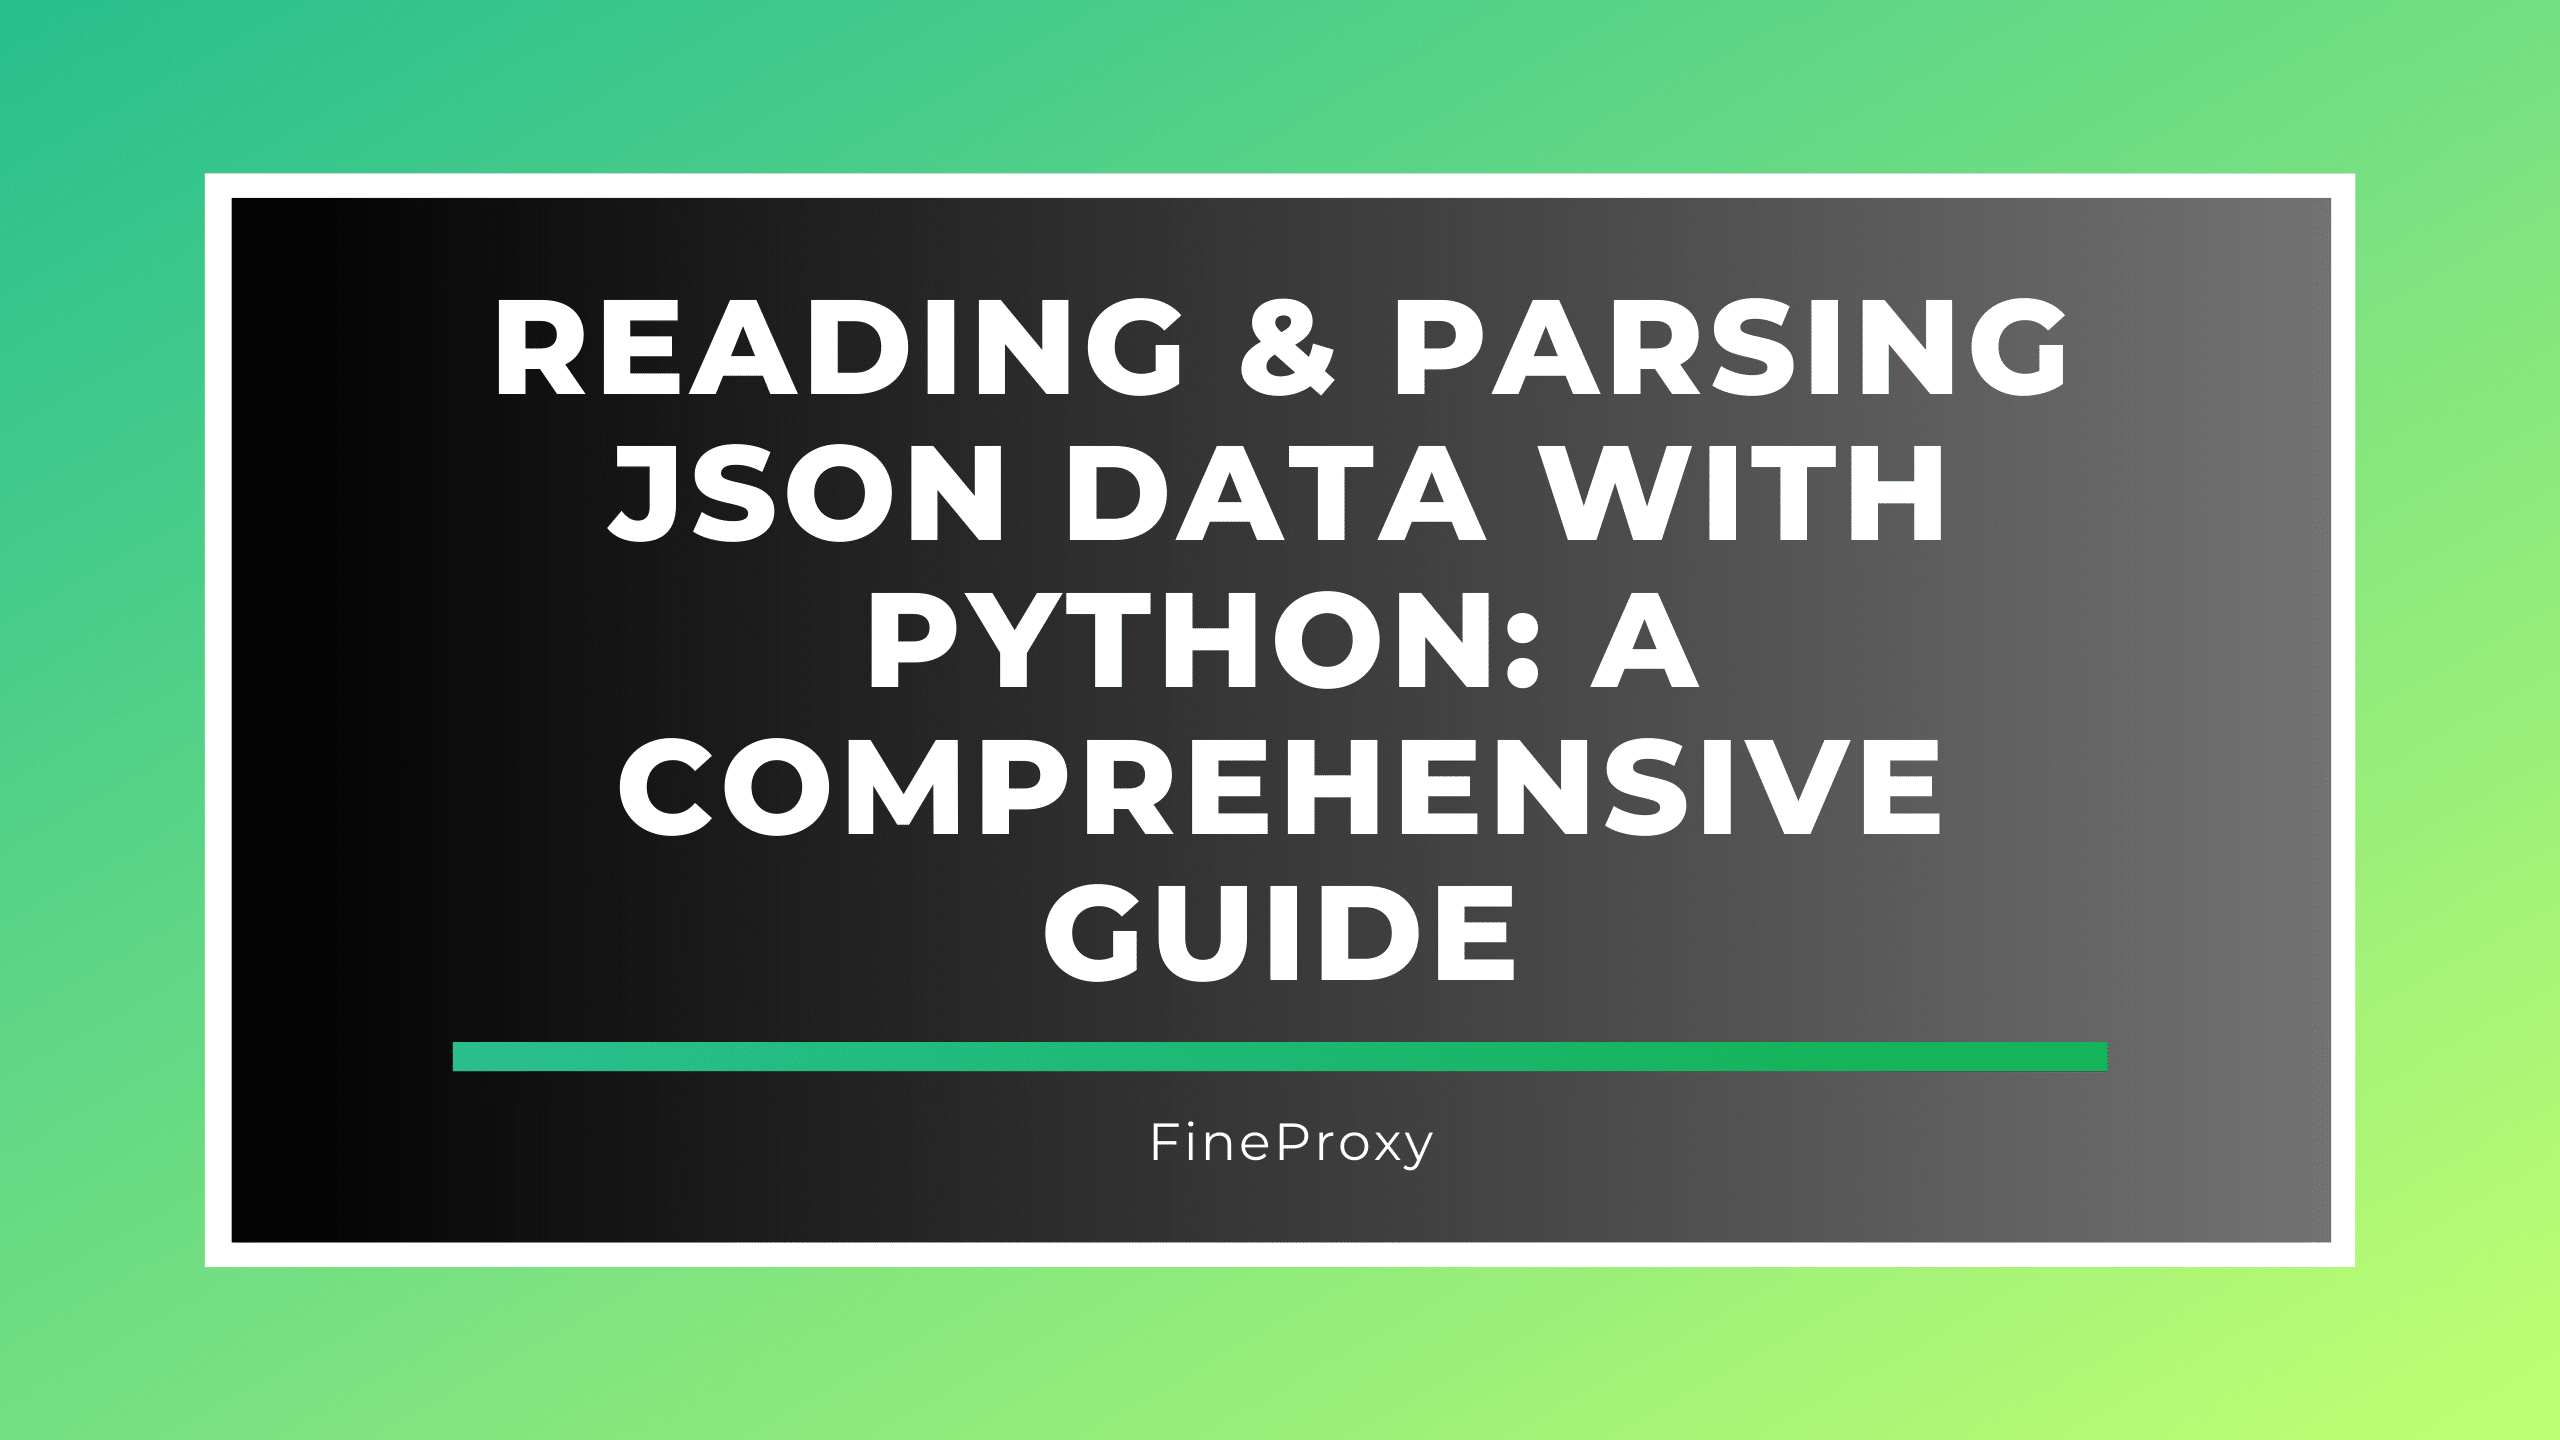 Reading & Parsing JSON Data With Python: A Comprehensive Guide